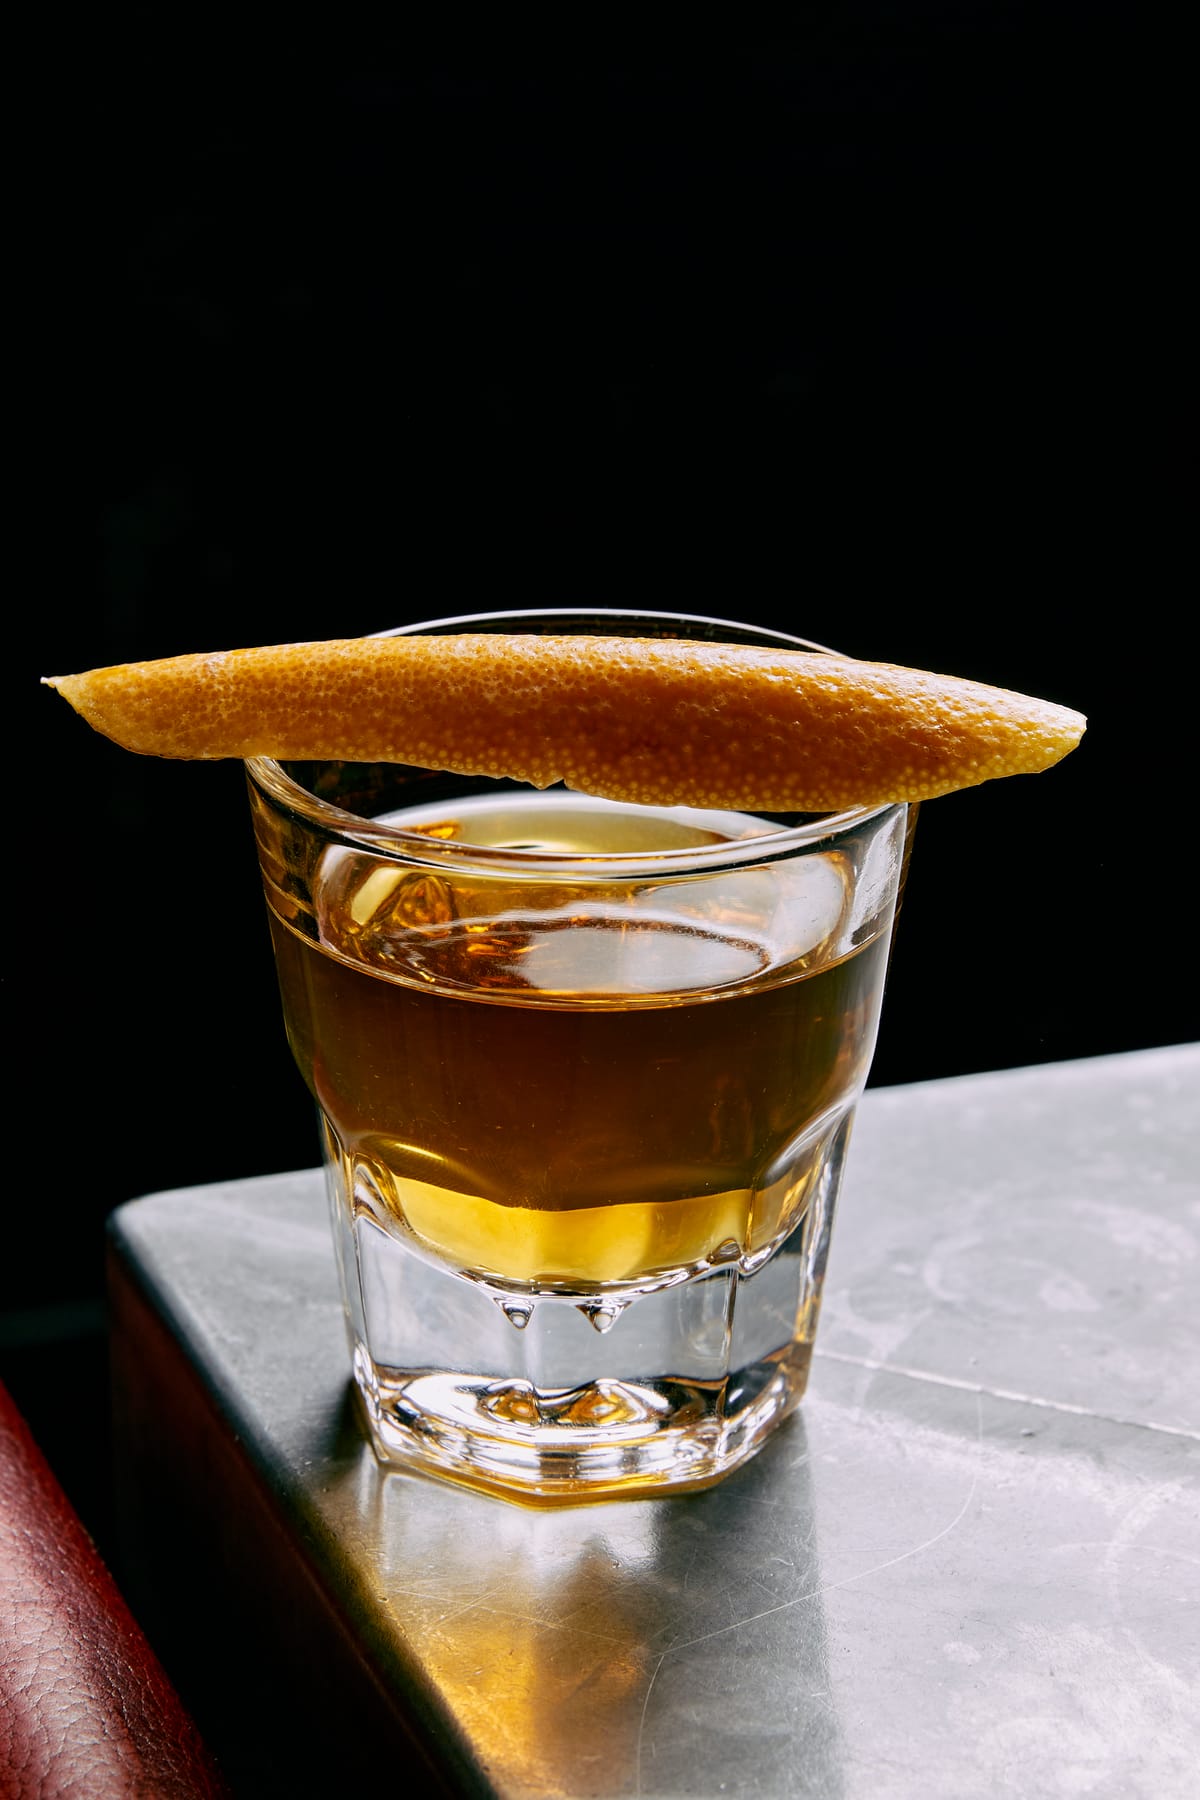 Get the recipe for Nat Yao’s Peacemaker cocktail